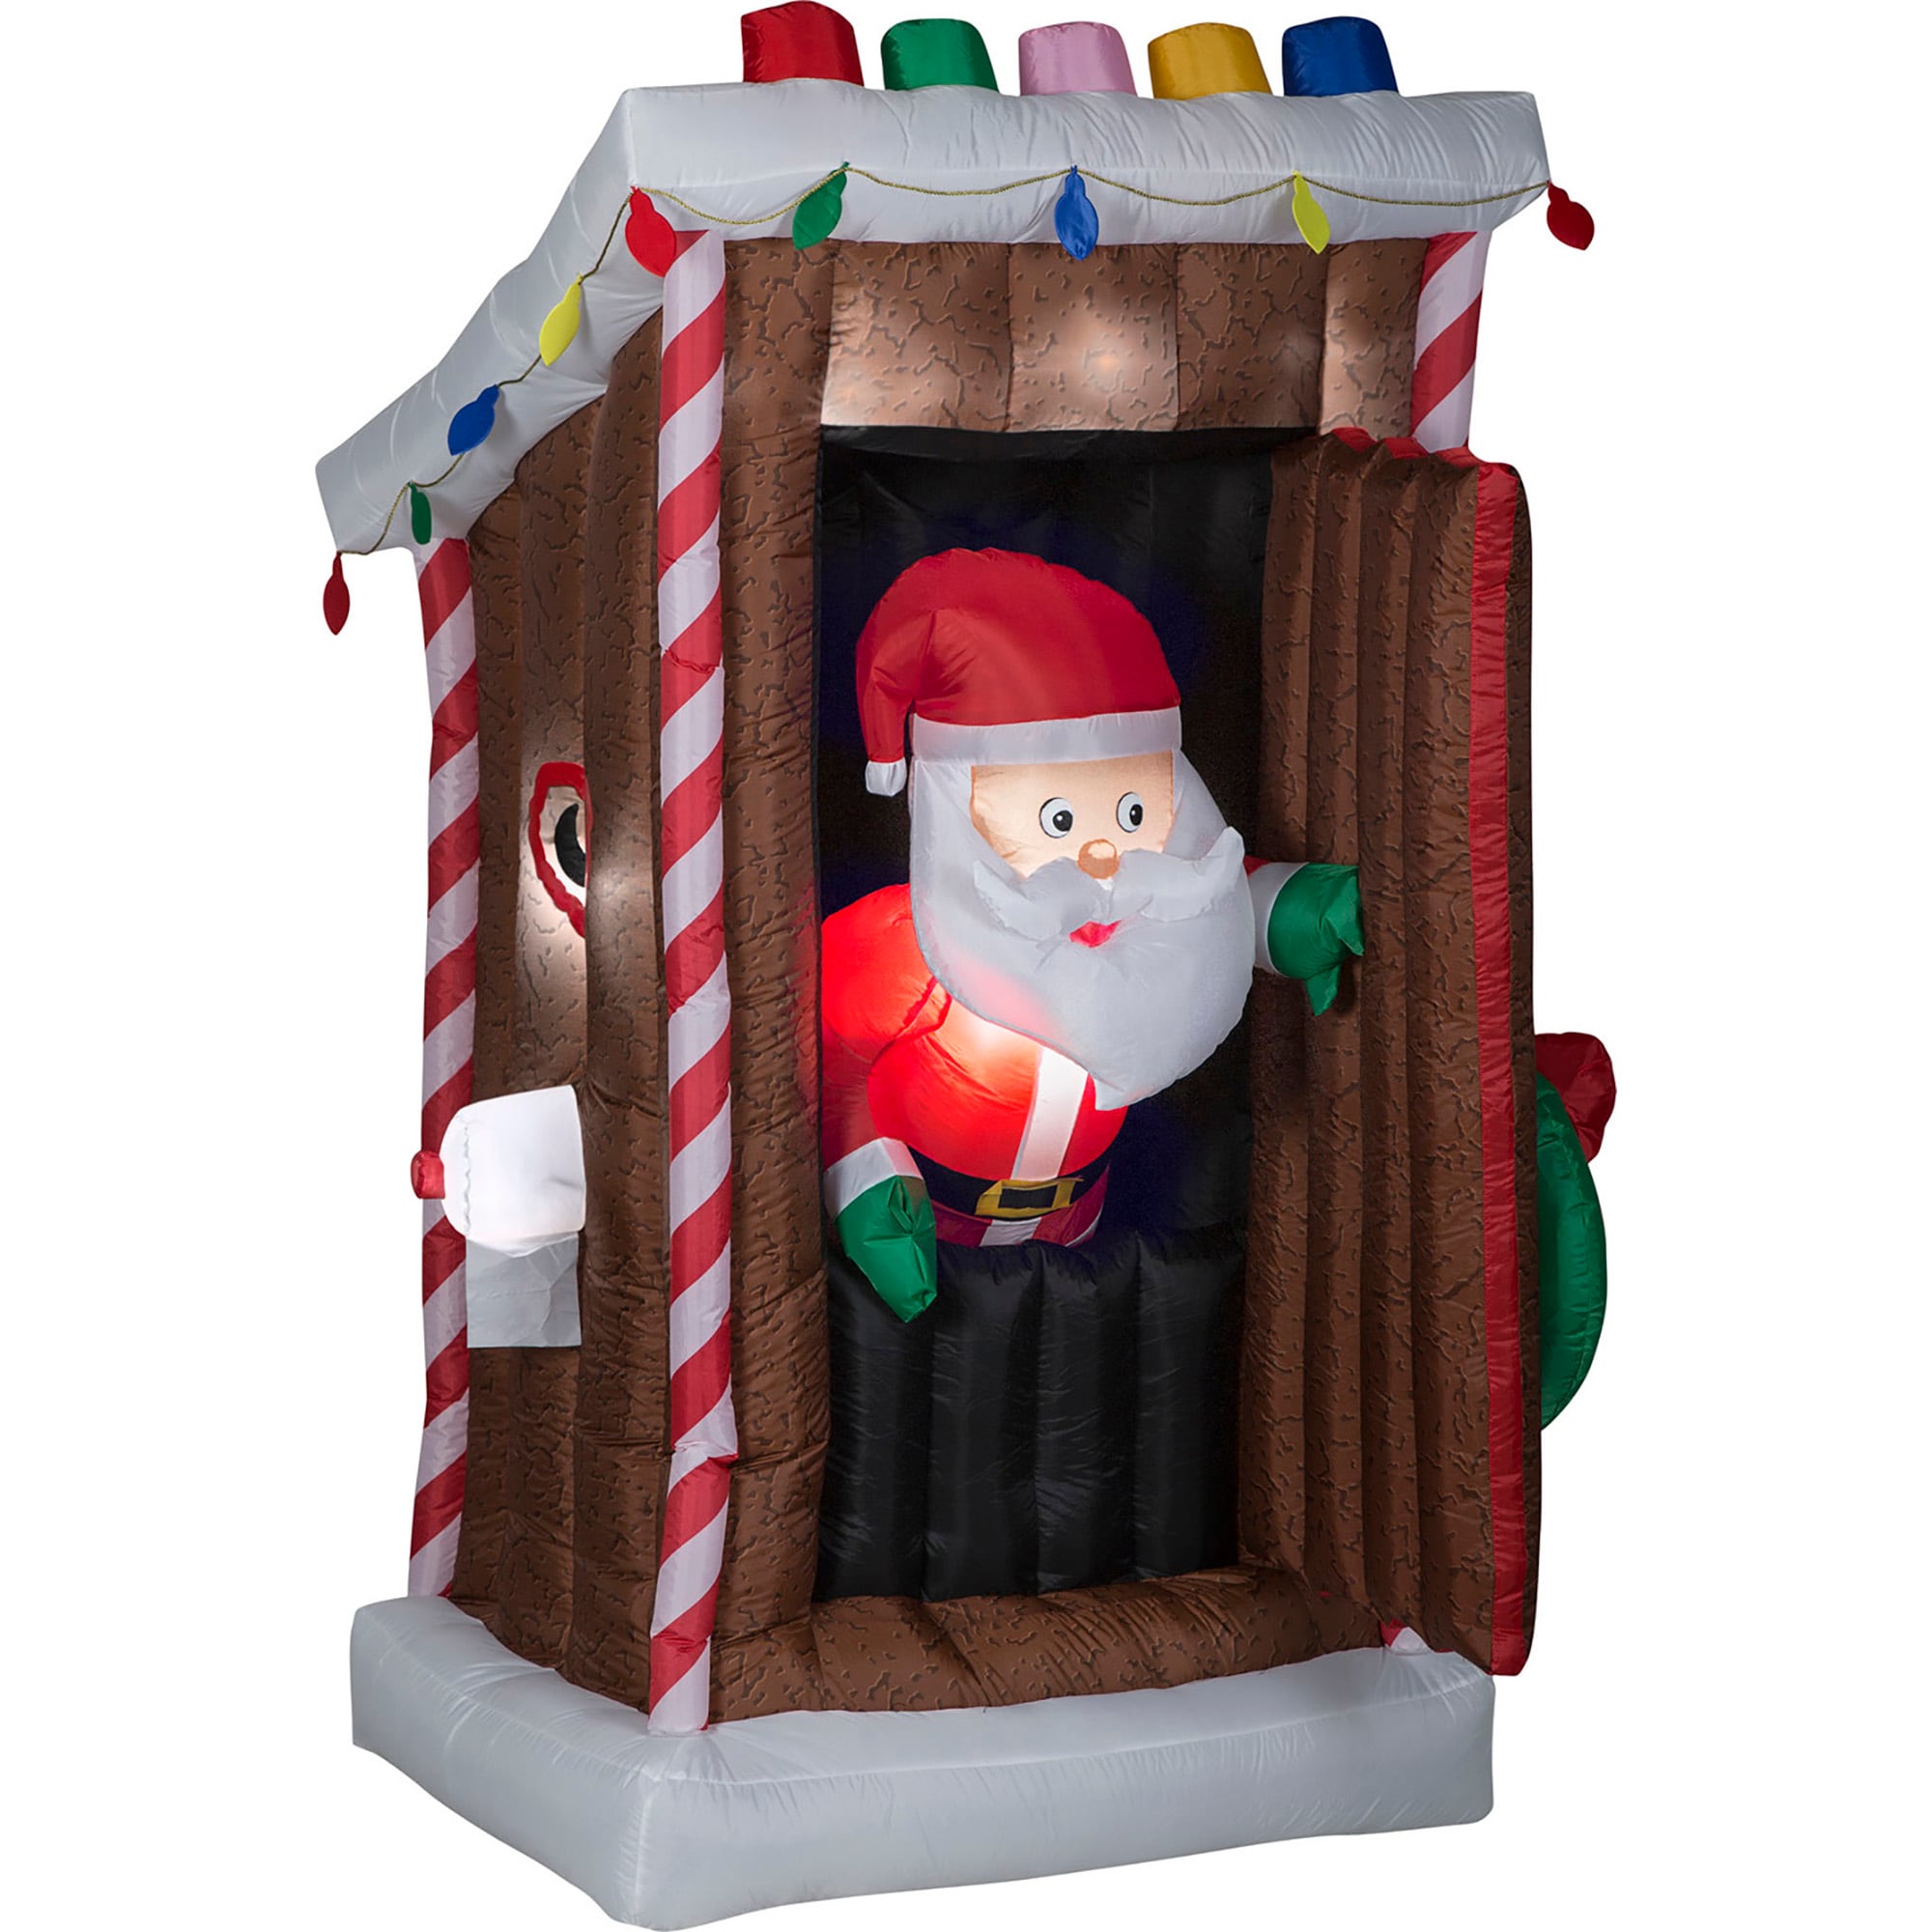 Airblown Inflatable Santa Claus Hanging Christmas Outdoor Yard Decoration Gemmy